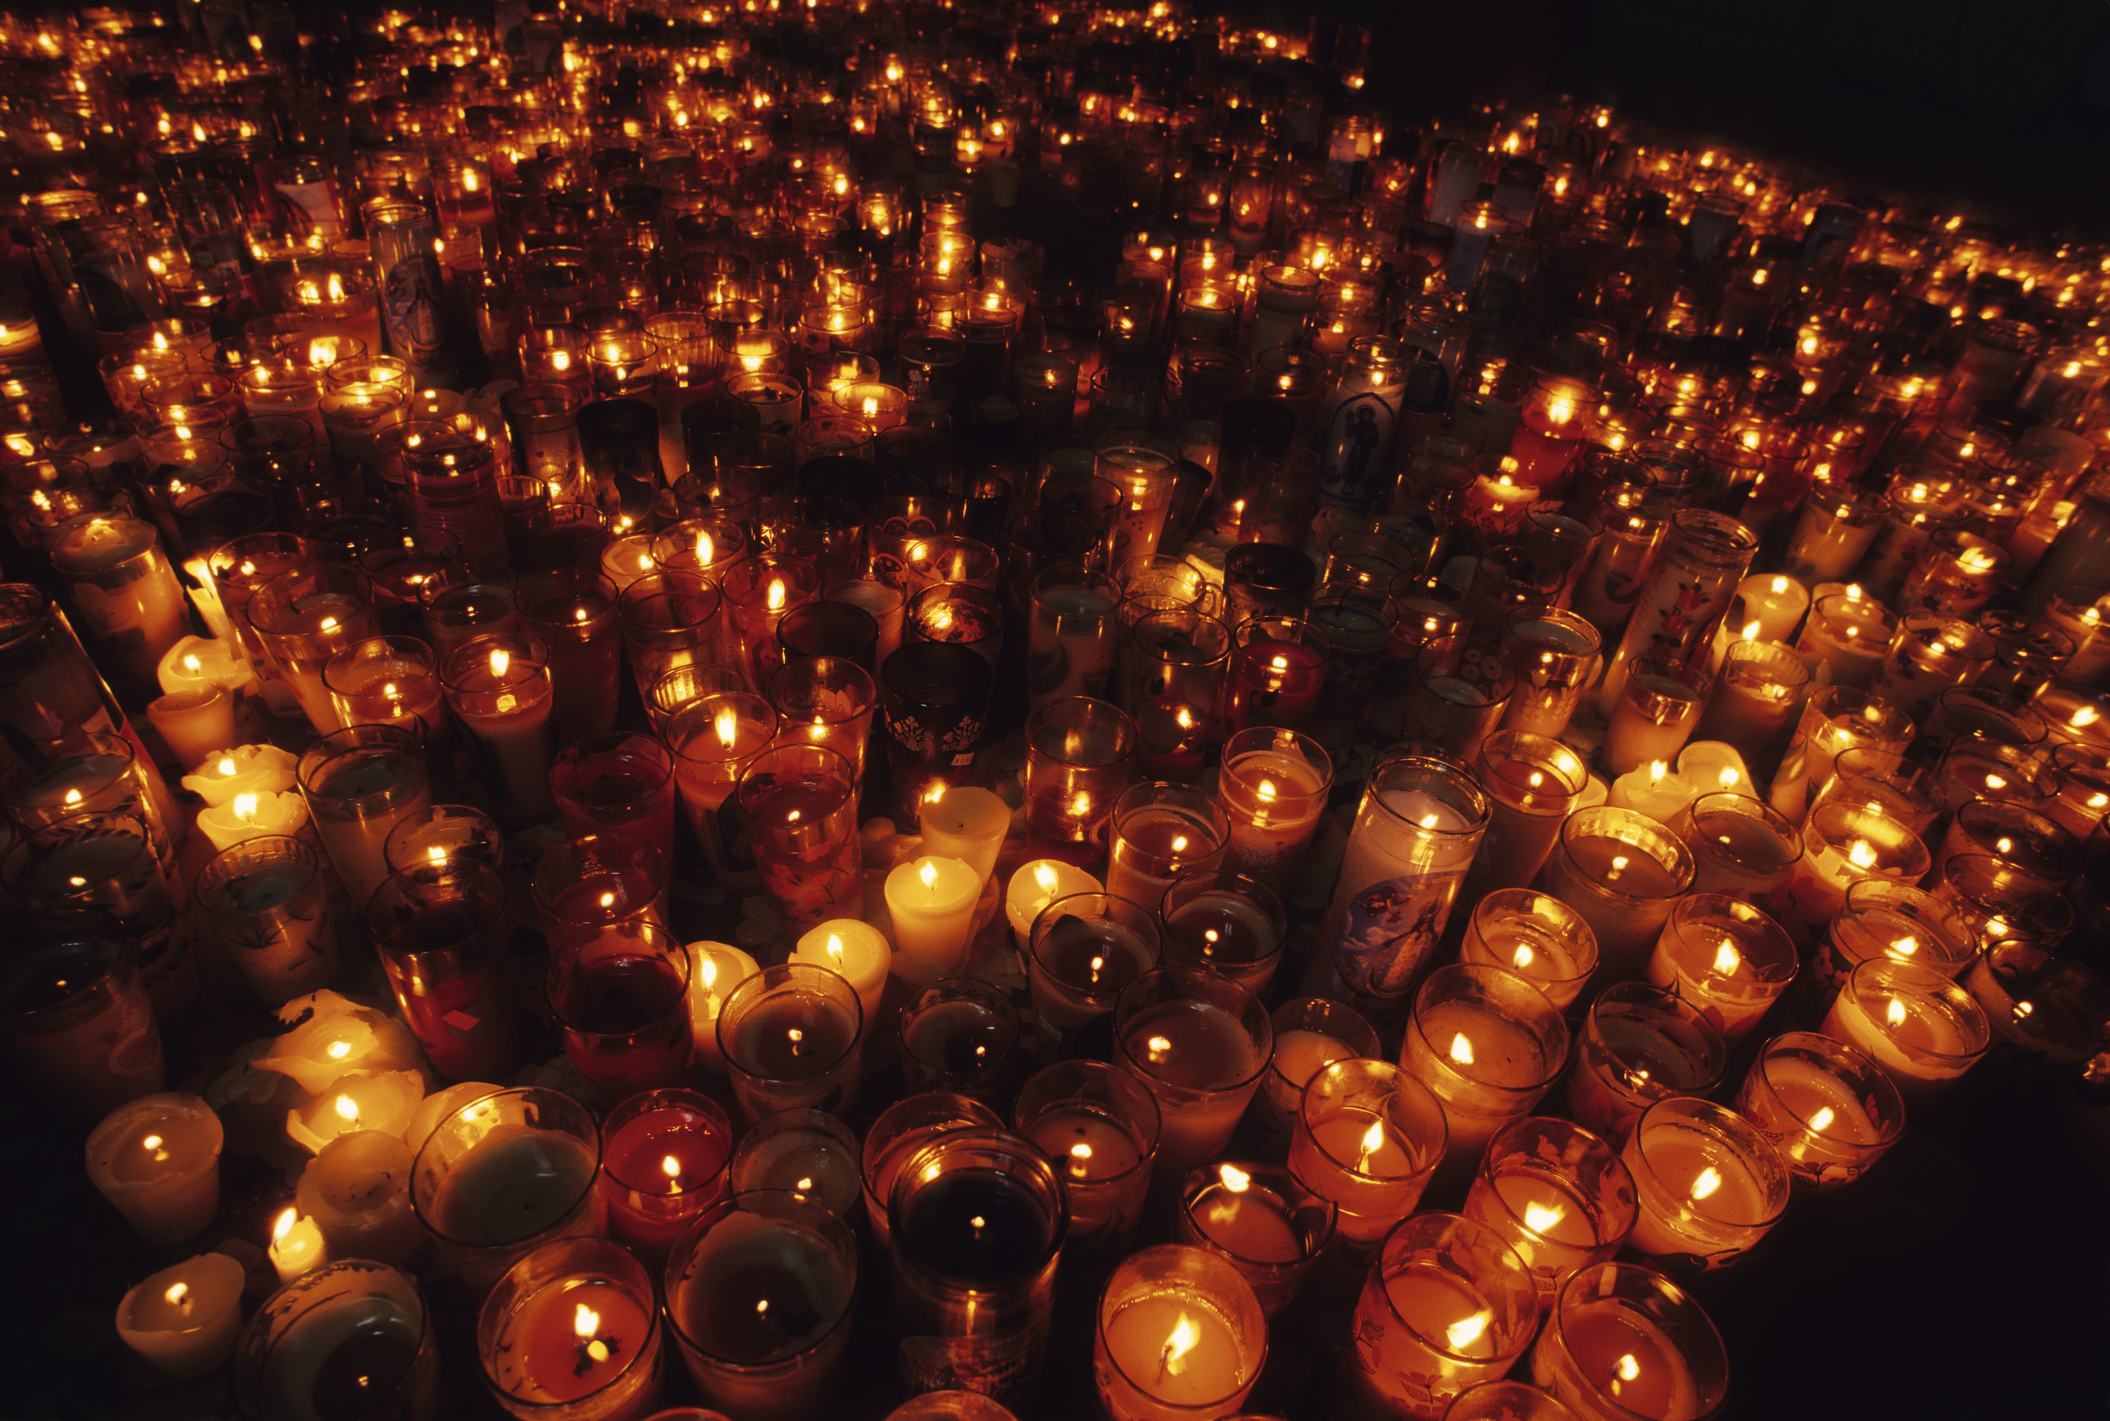 Numerous lit candles in a dark space